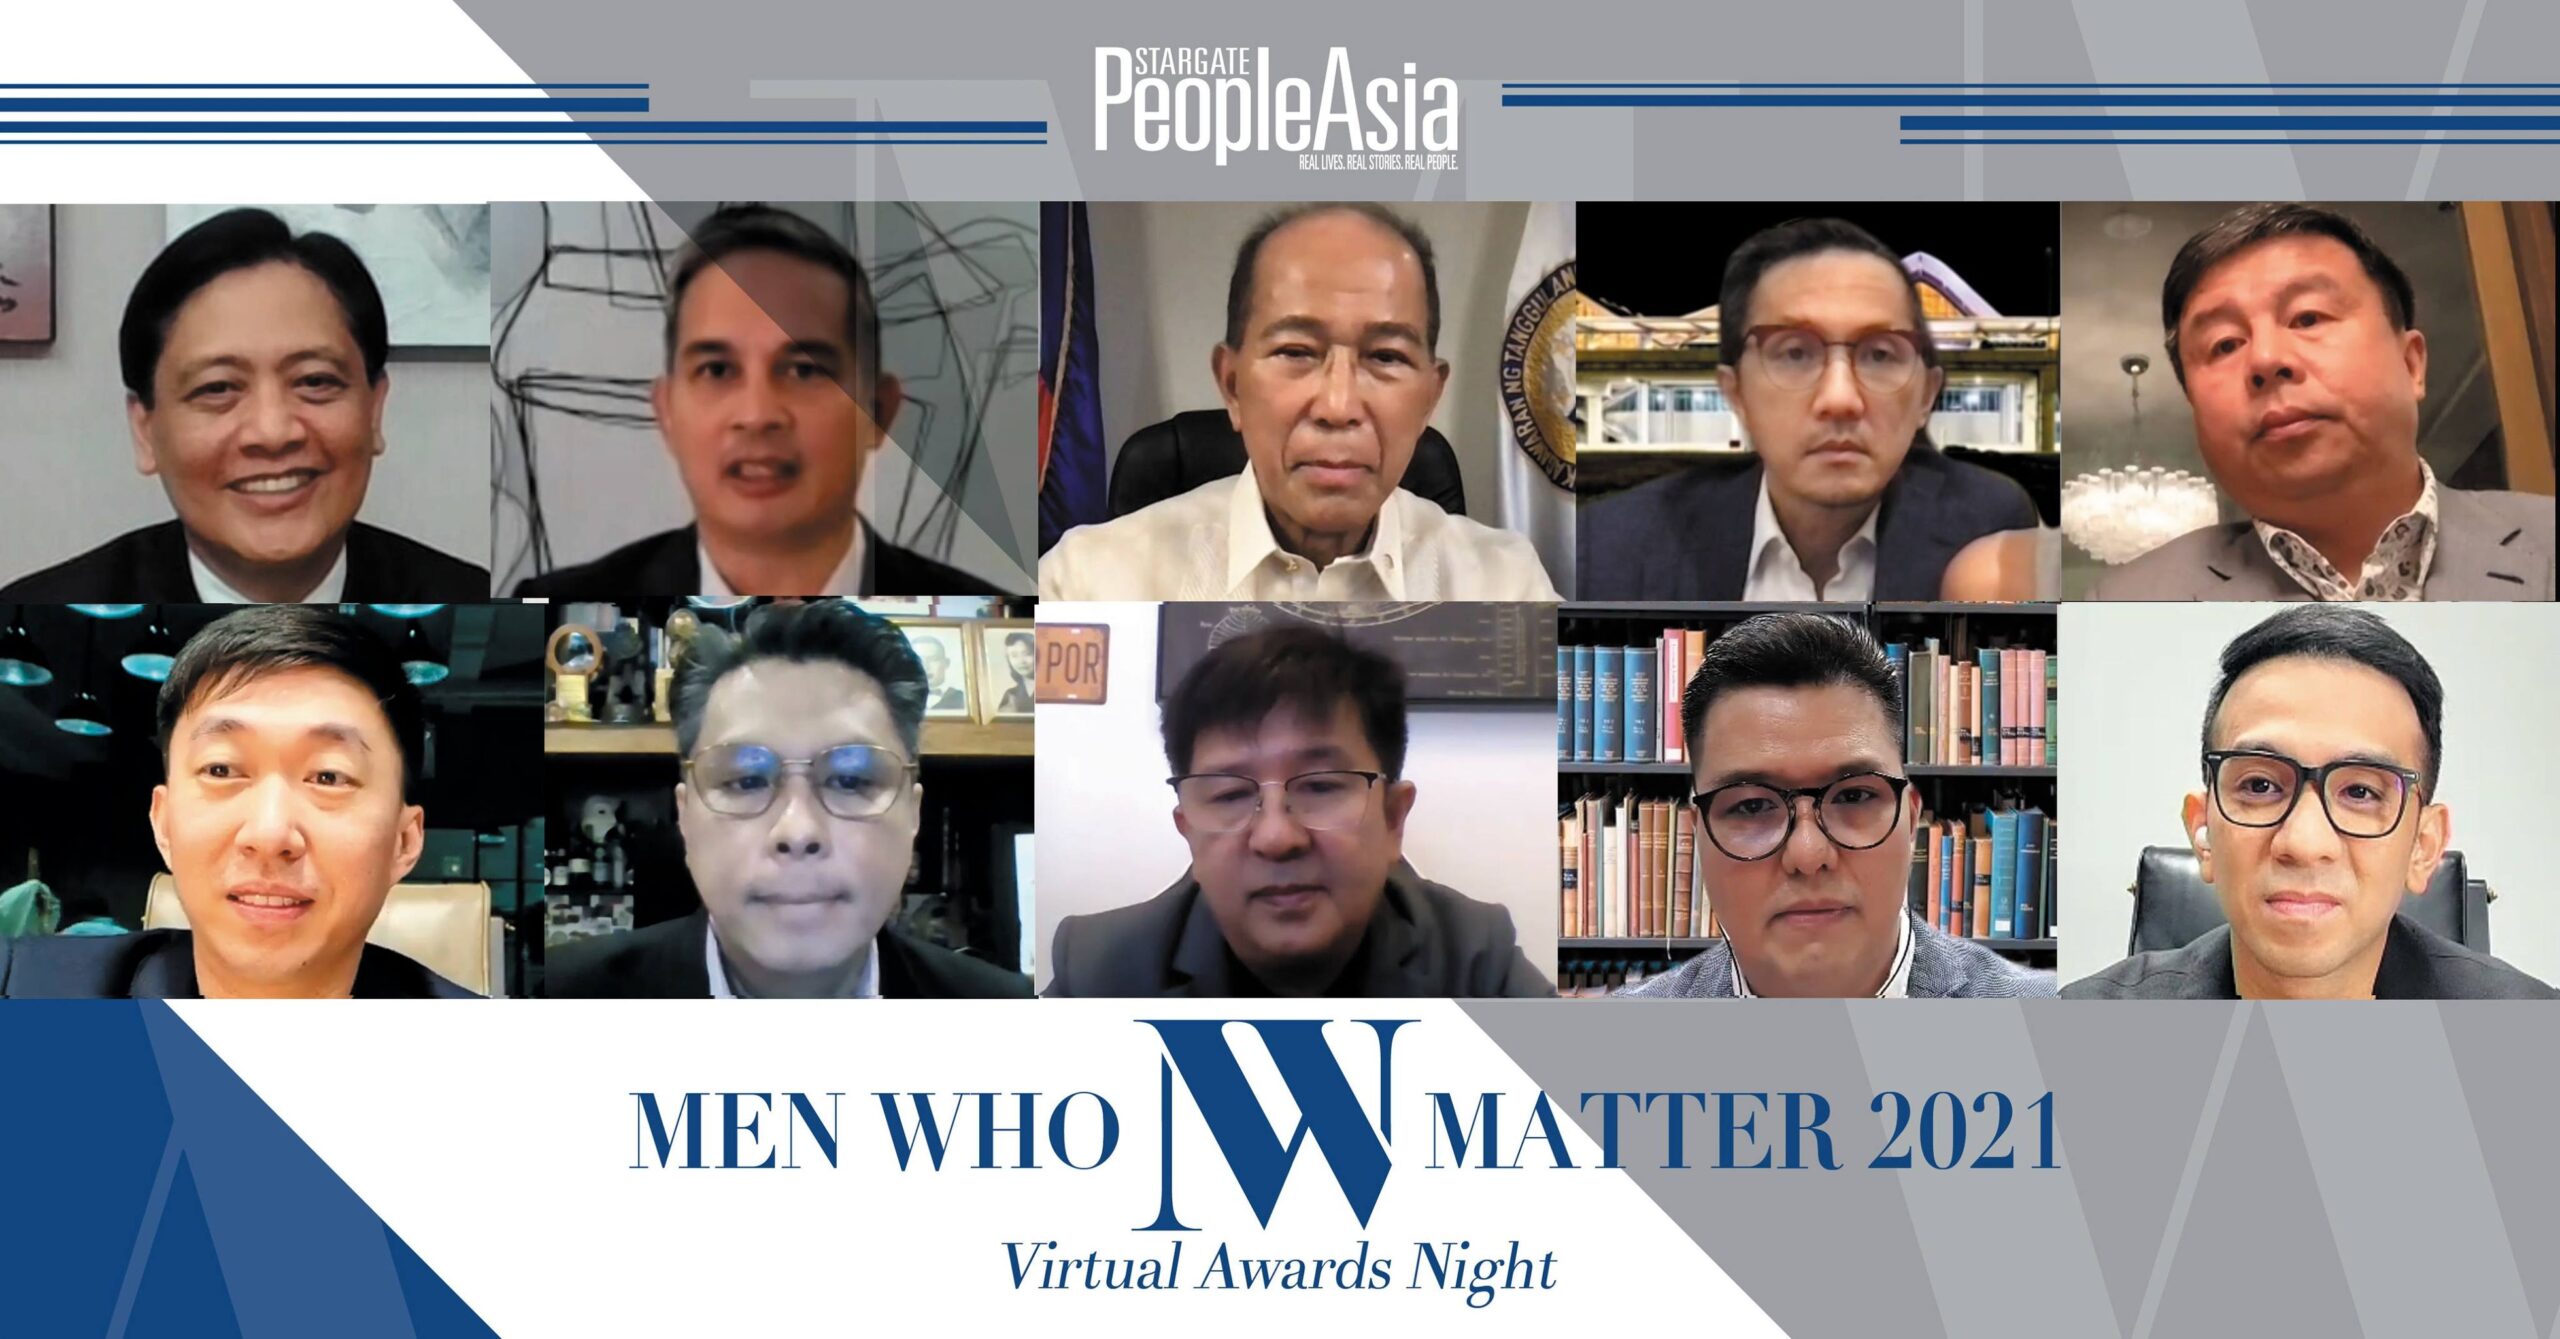 PeopleAsia’s “Men Who Matter” 2021 share awards with frontliners & countrymen